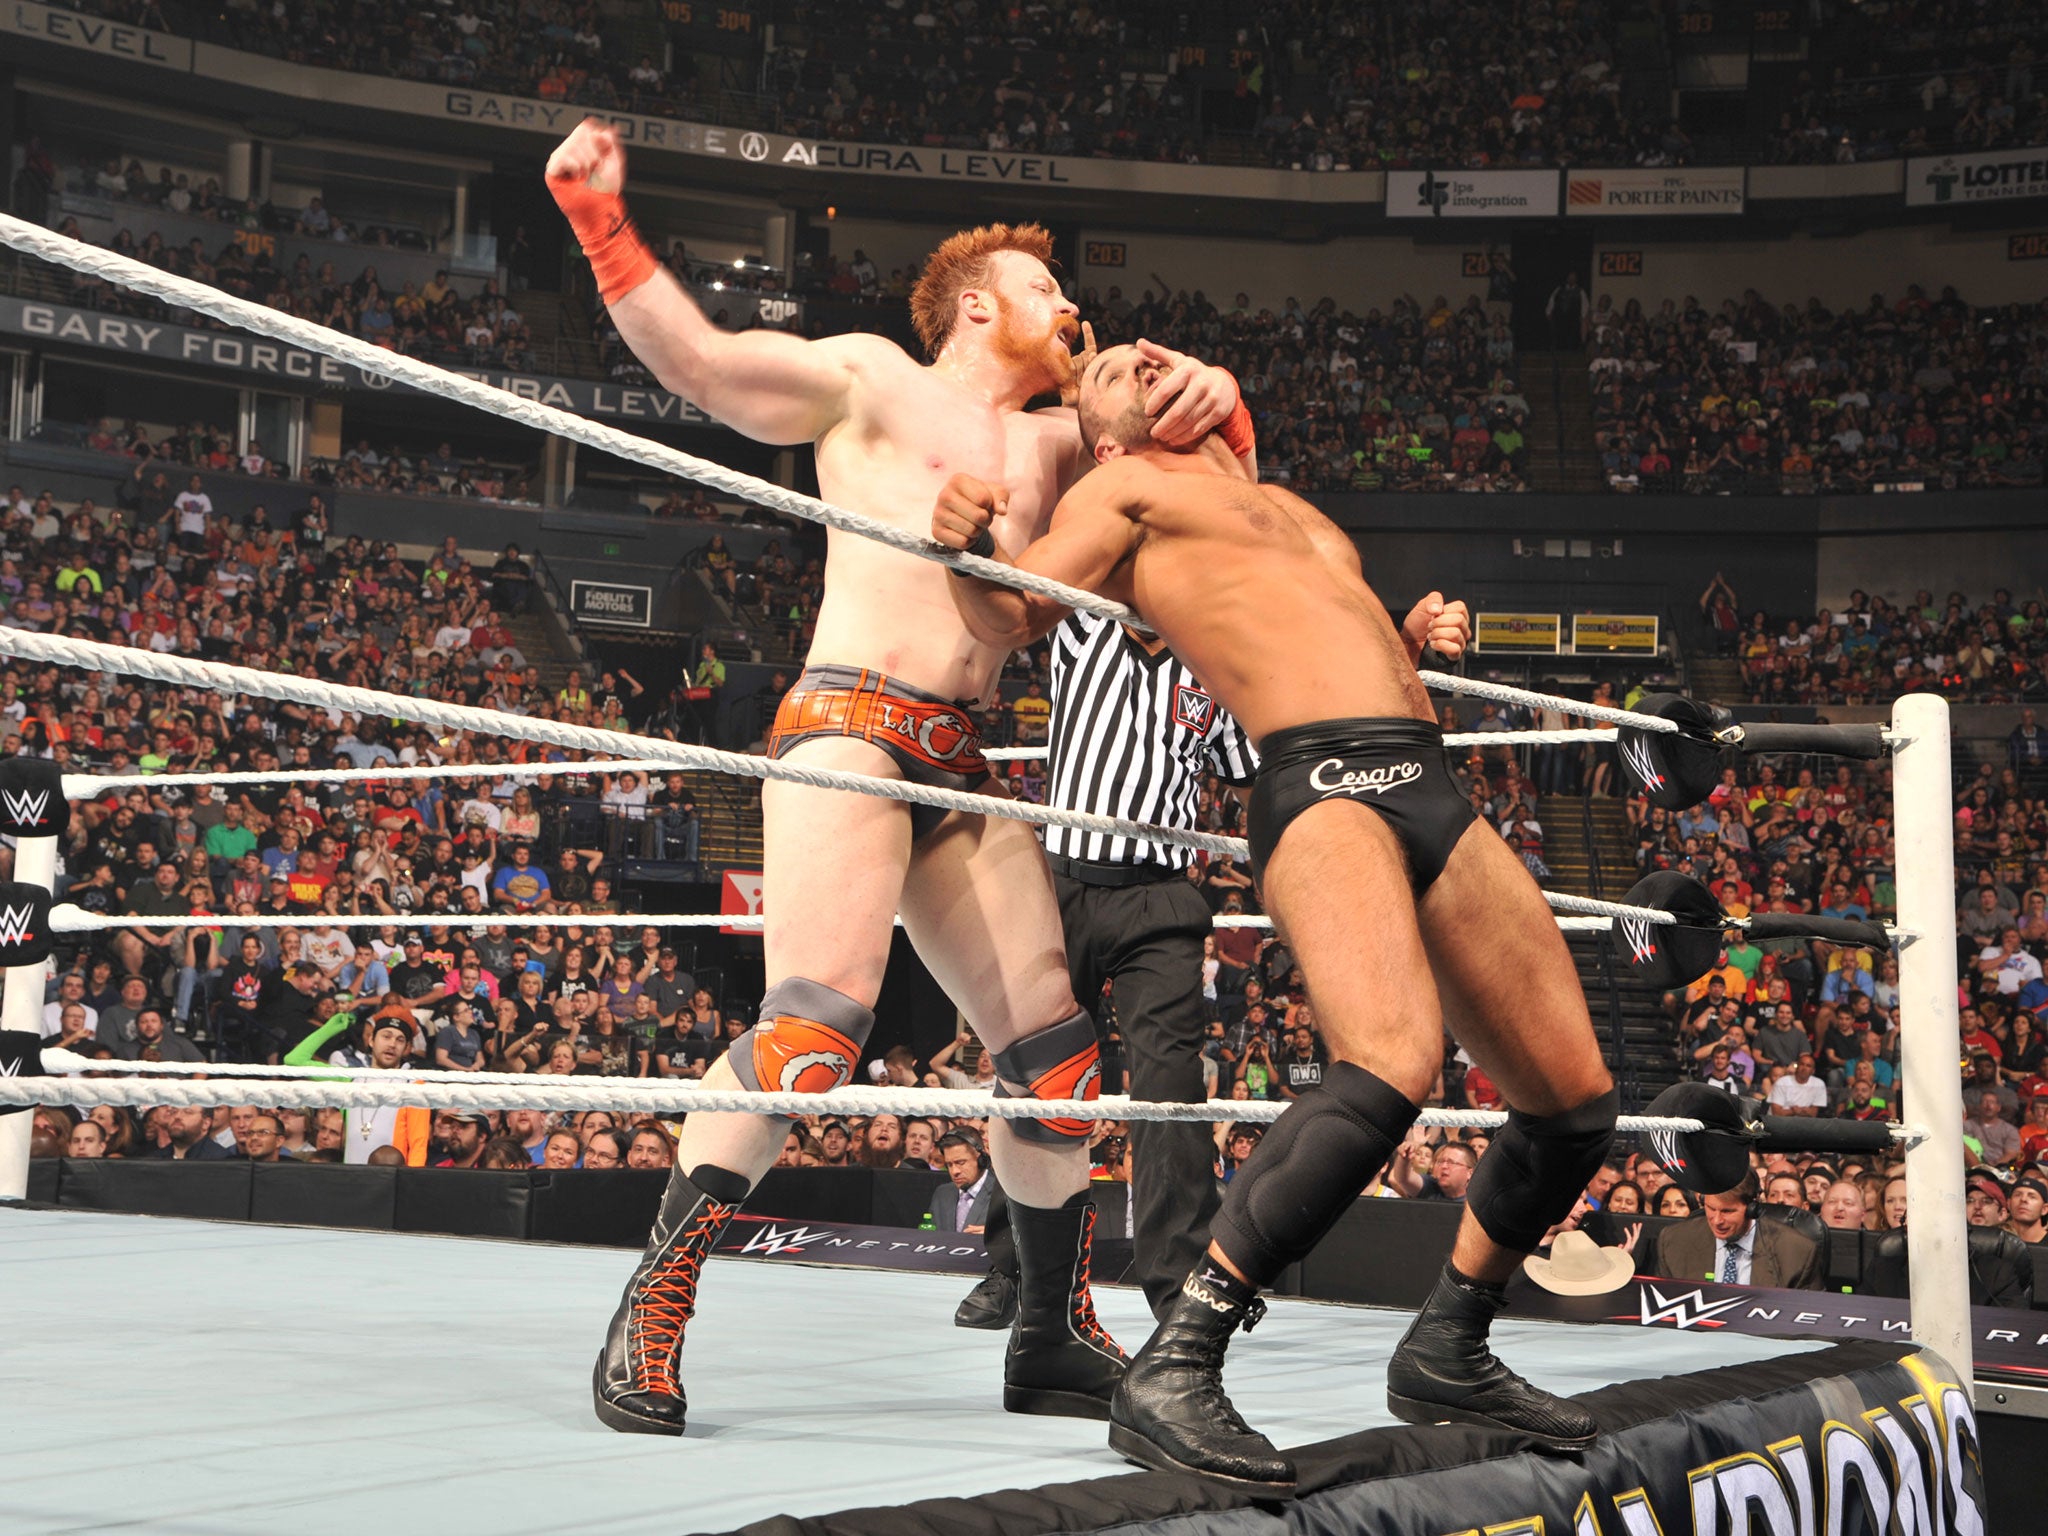 Sheamus ties up Cesaro on the ropes before unleashing 10 blows across his chest